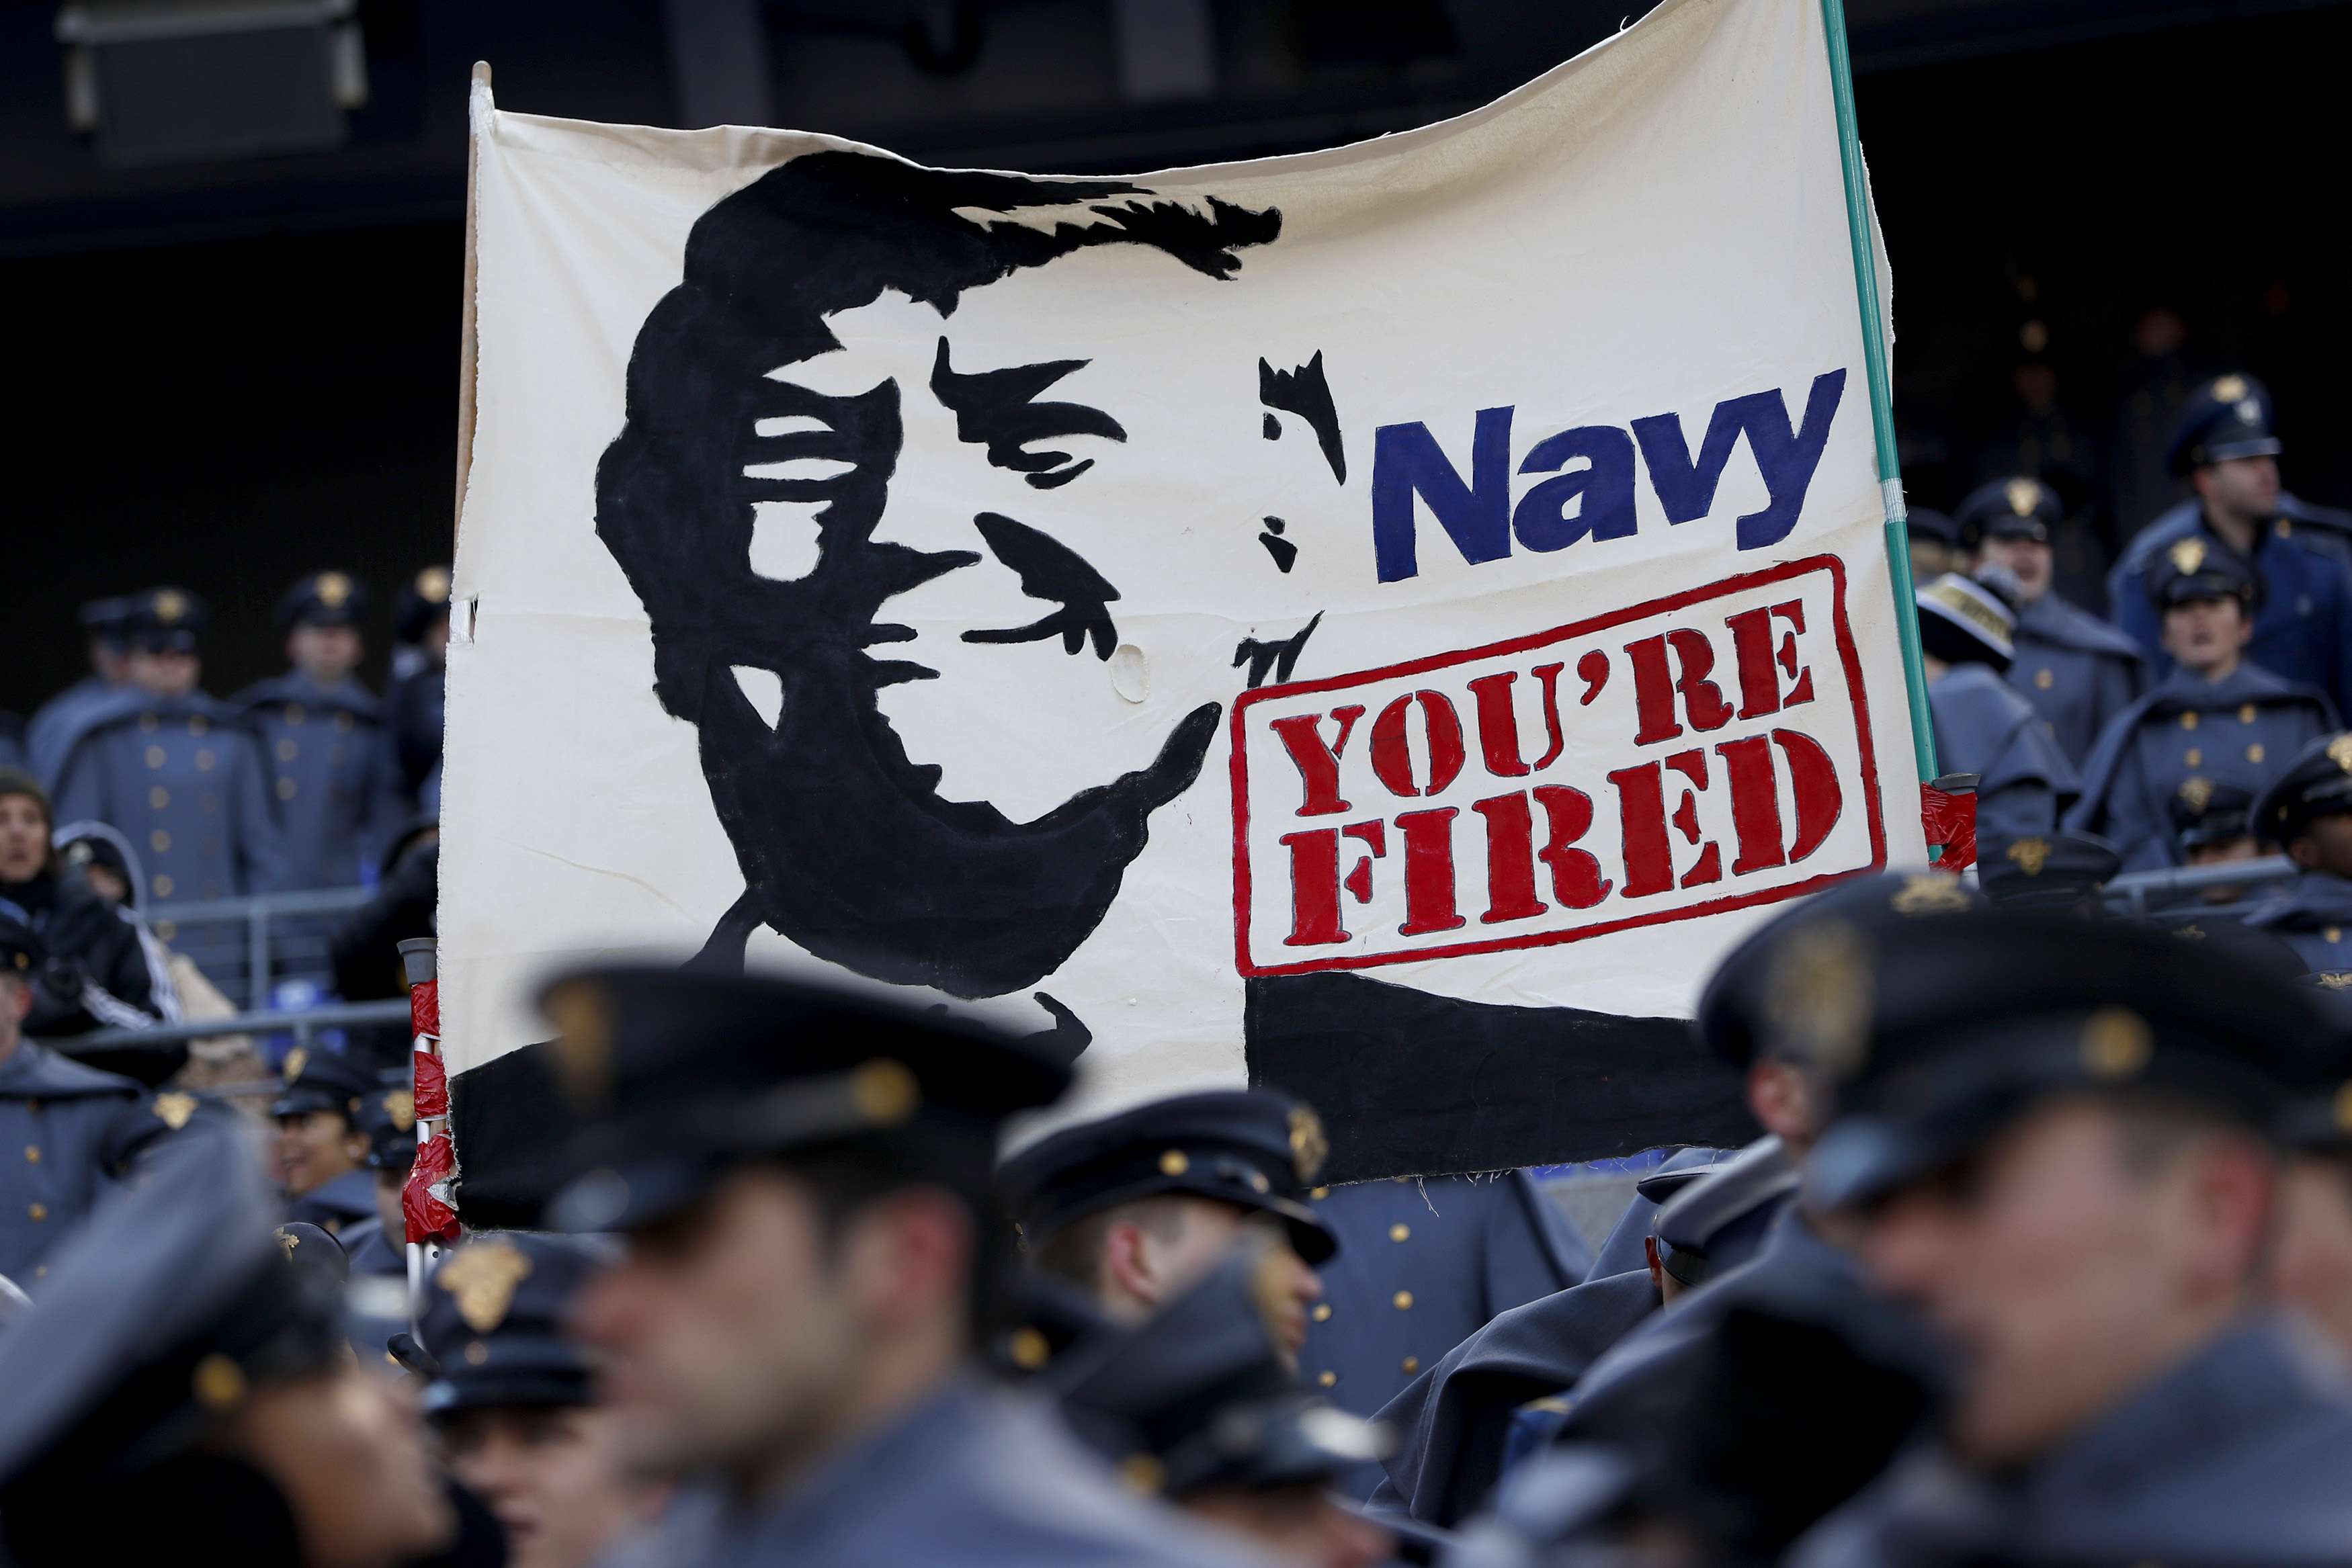 Cadets from the US Military Academy fly a banner depicting Donald Trump prior to the game between the Navy Midshipmen and the Army Black Nights at M&T Bank Stadium in Baltimore, Maryland. Photo: AFP